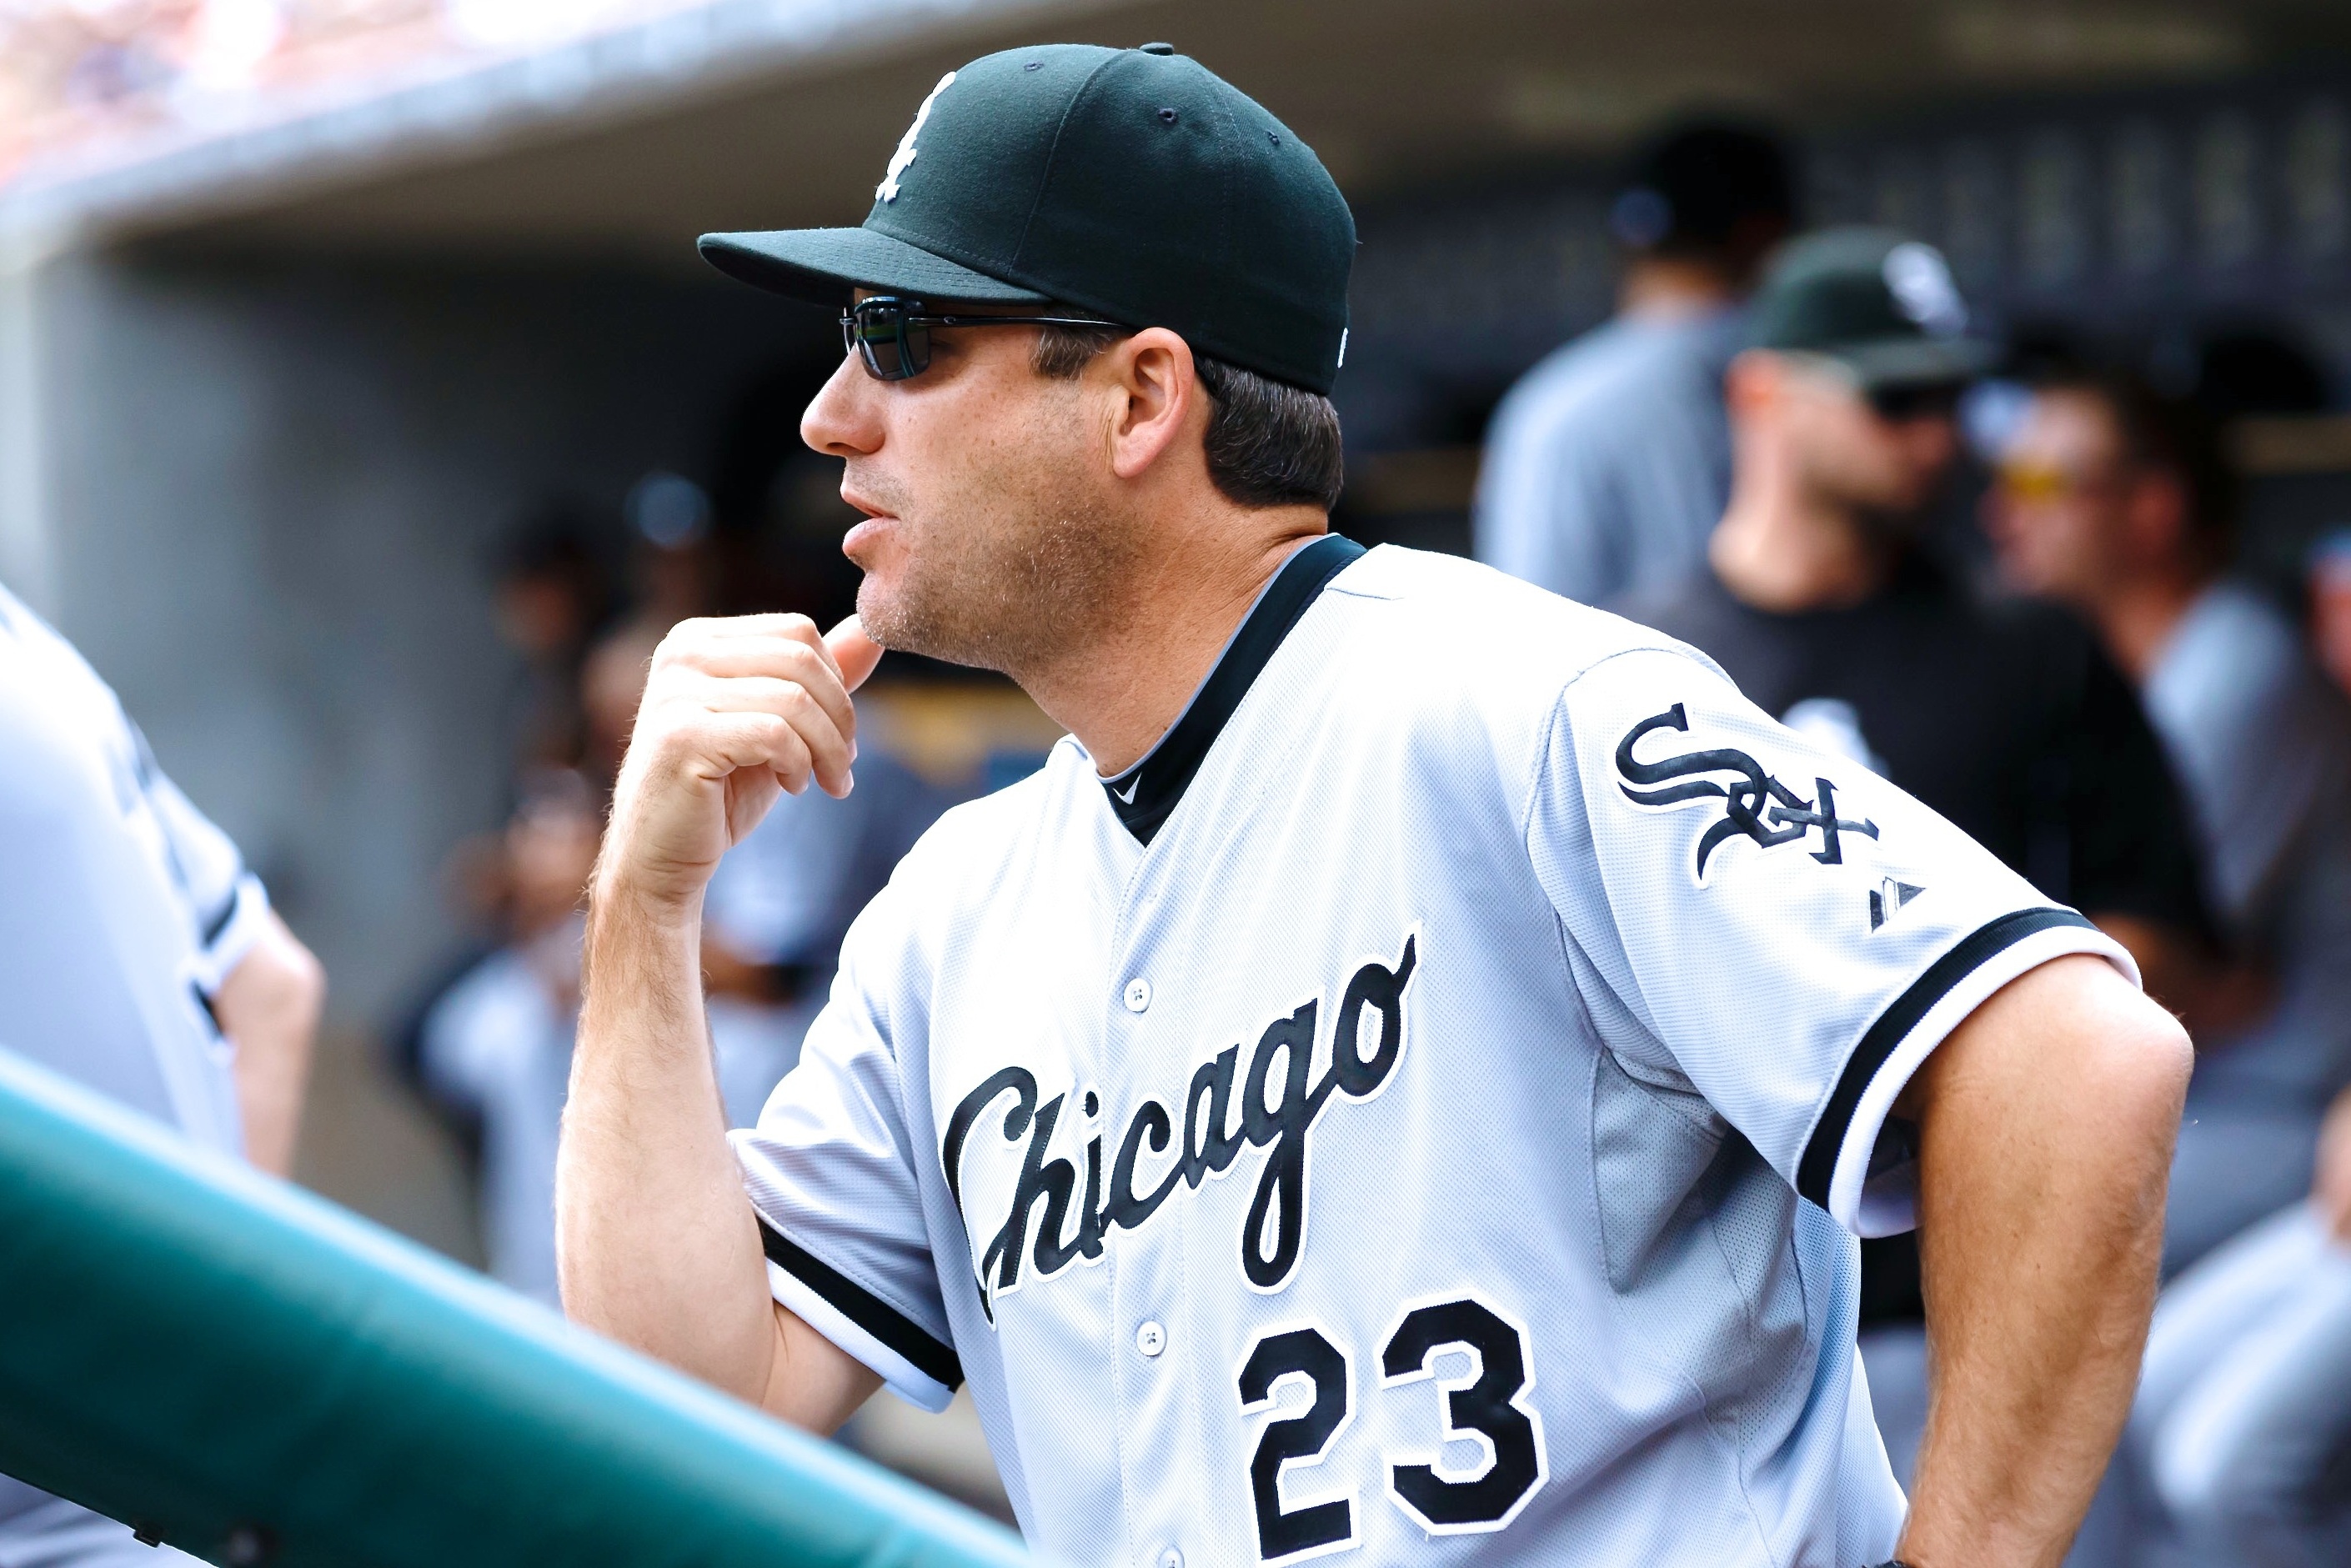 Former White Sox manager Robin Ventura earns degree from OSU – NBC